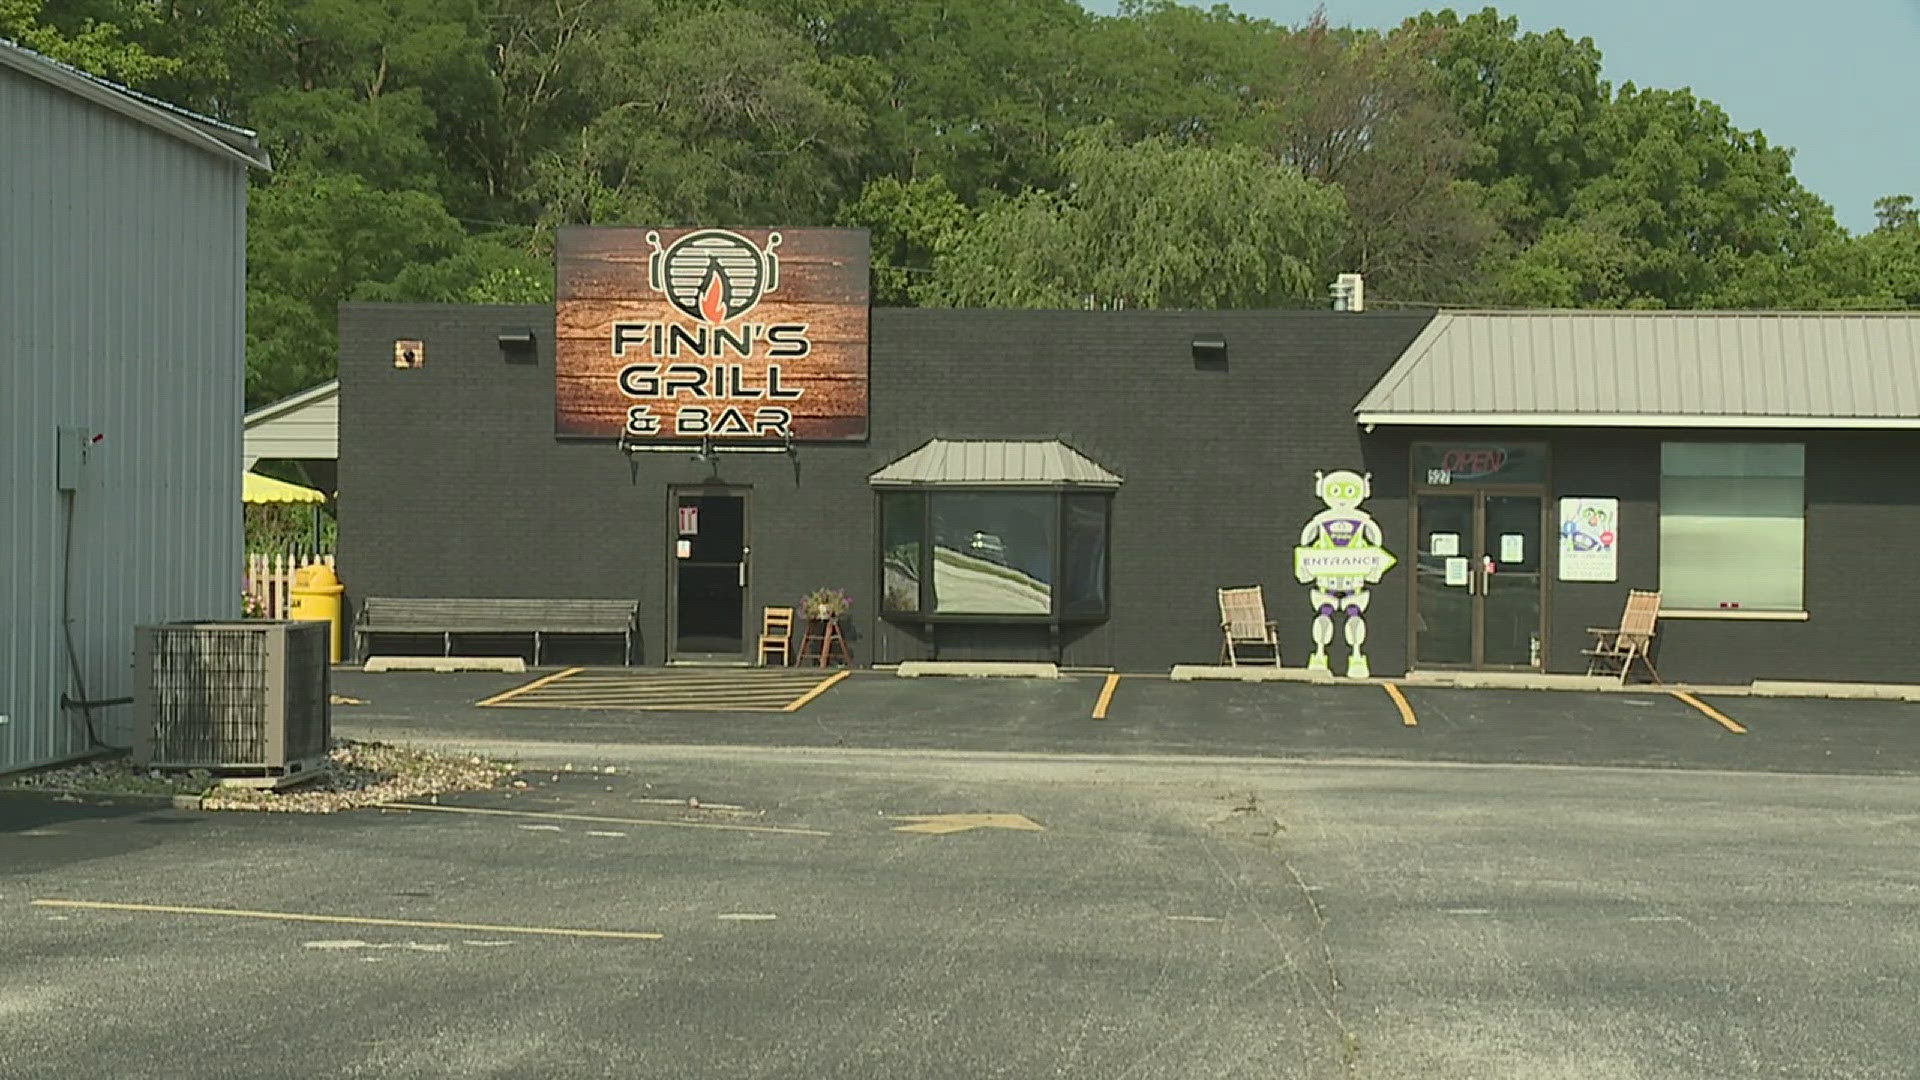 Patrick Poff, 40, was arrested by police on one count of burglary. Police believe Poff entered Finn's Fun Spot after an employee forgot to lock the door.